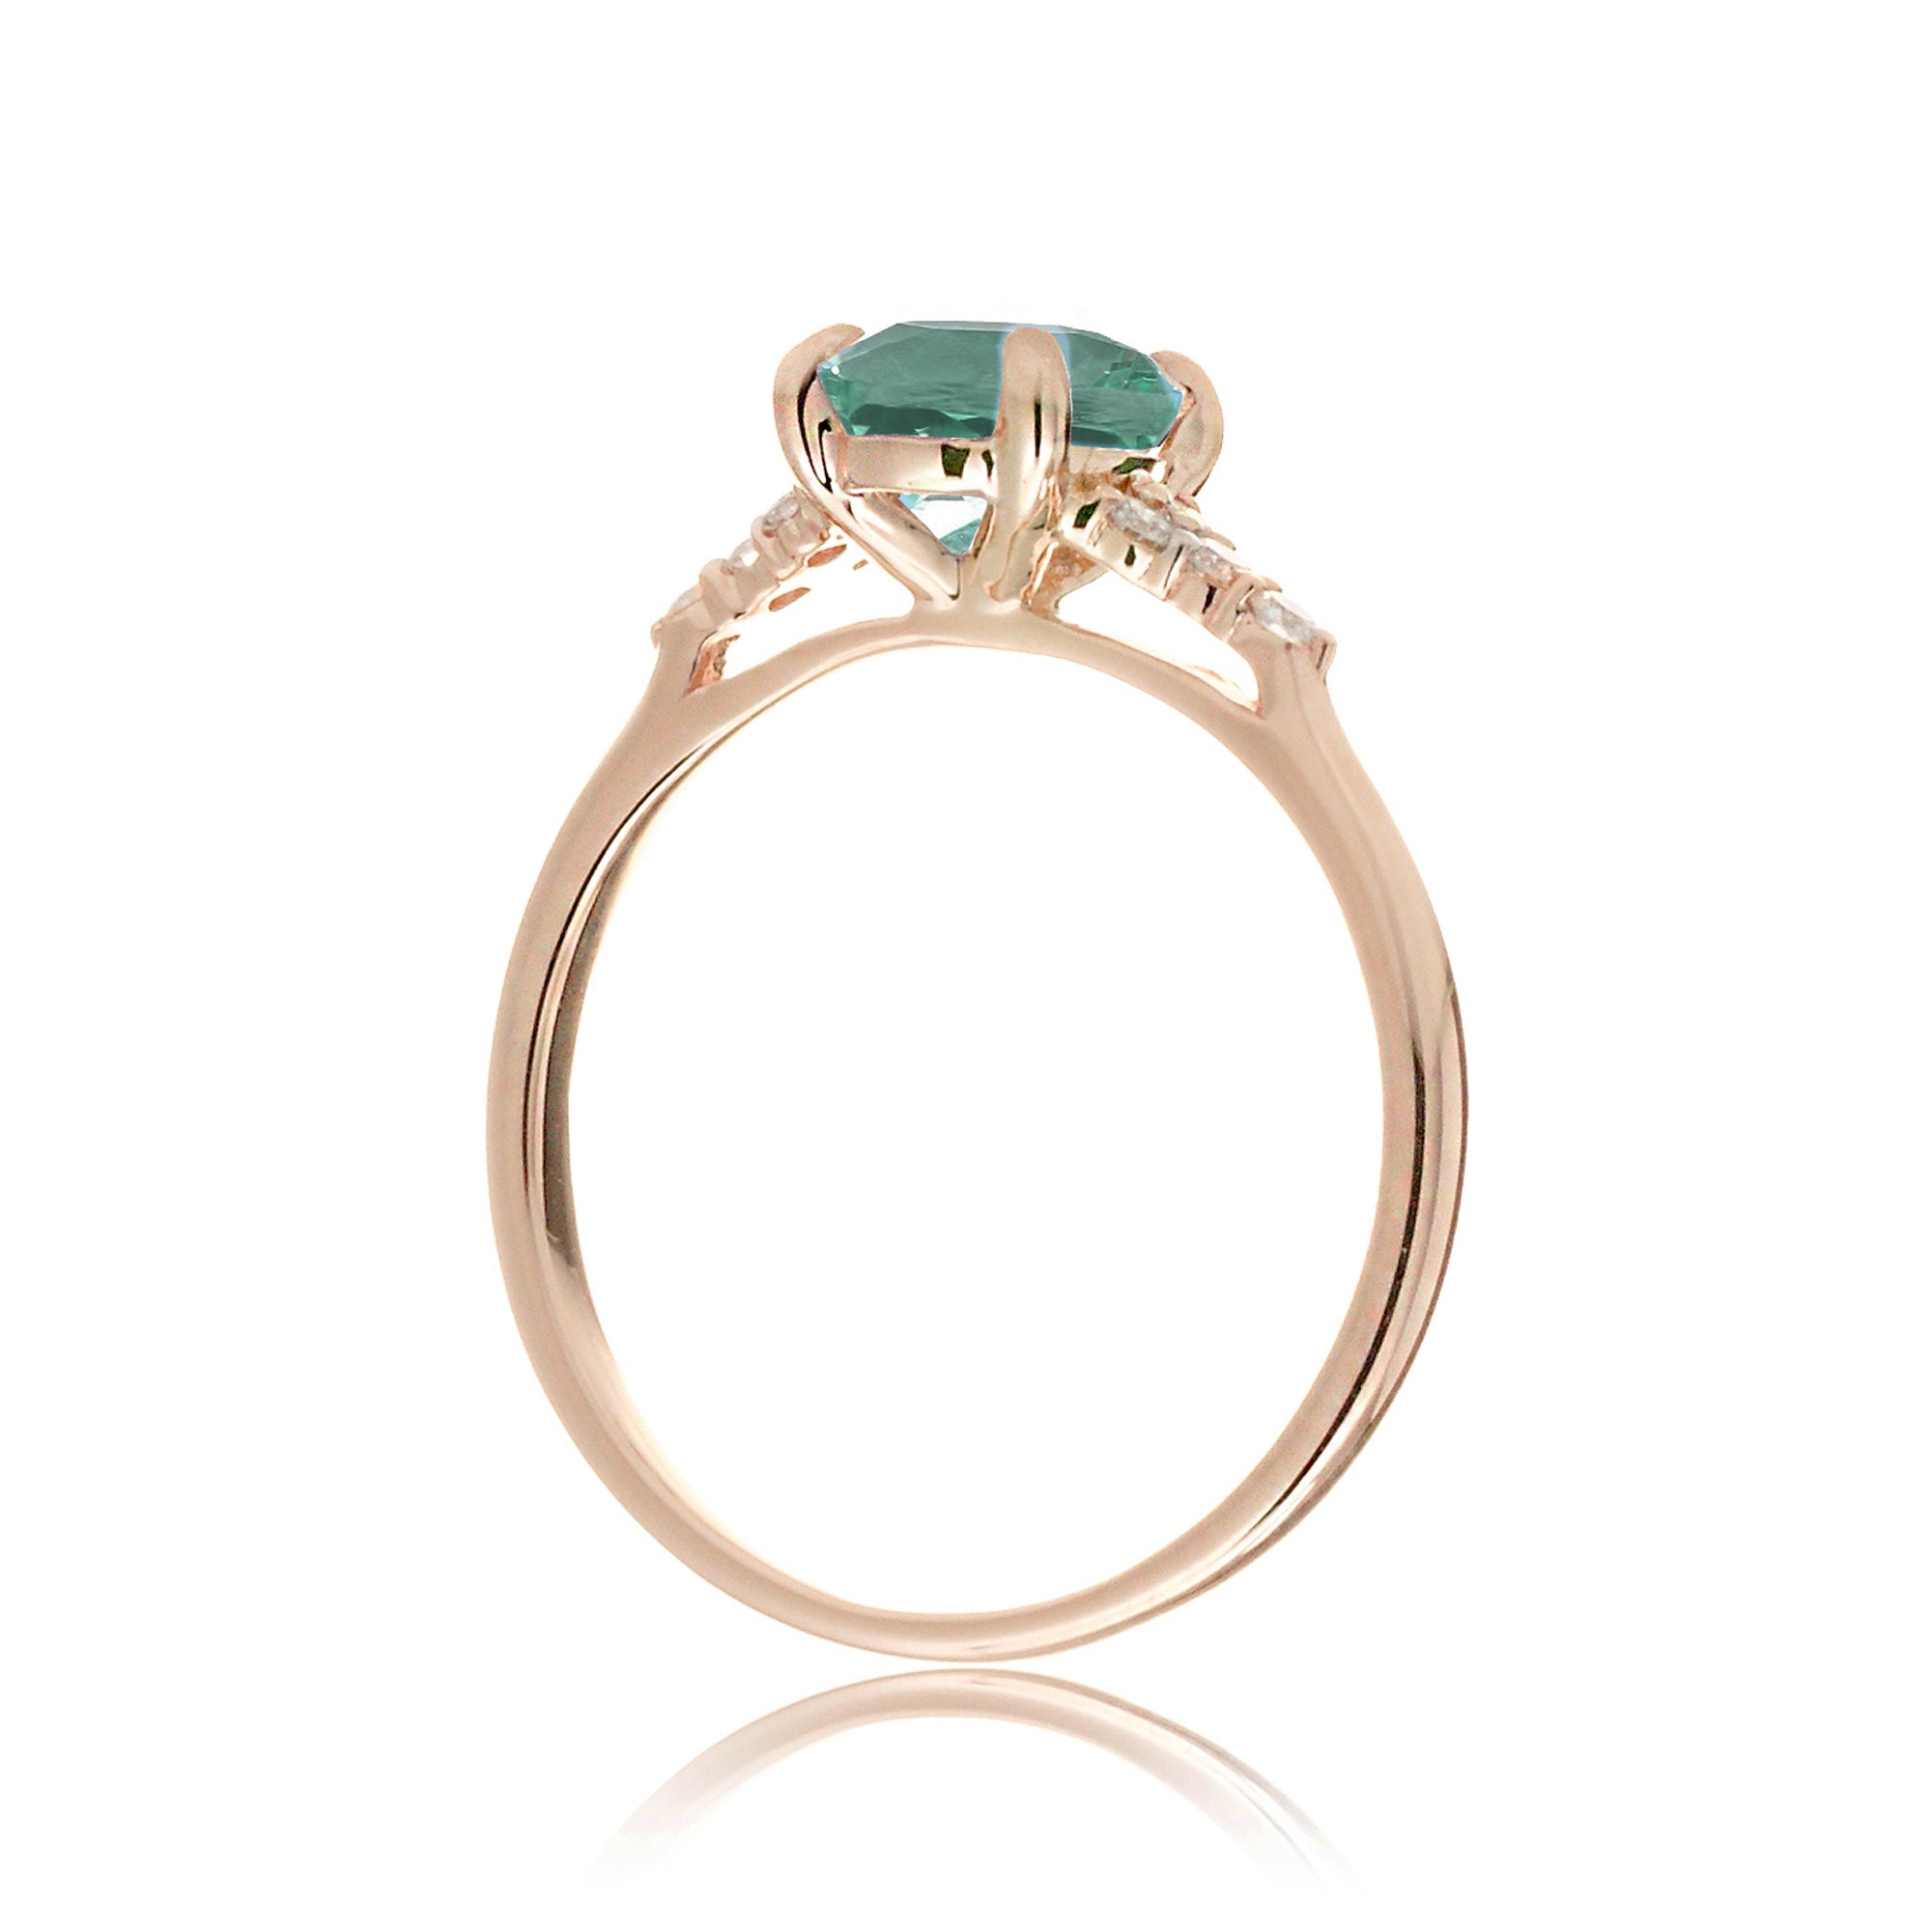 Pear cut green sapphire and diamond engagement ring in rose gold - the Chloe lab-grown